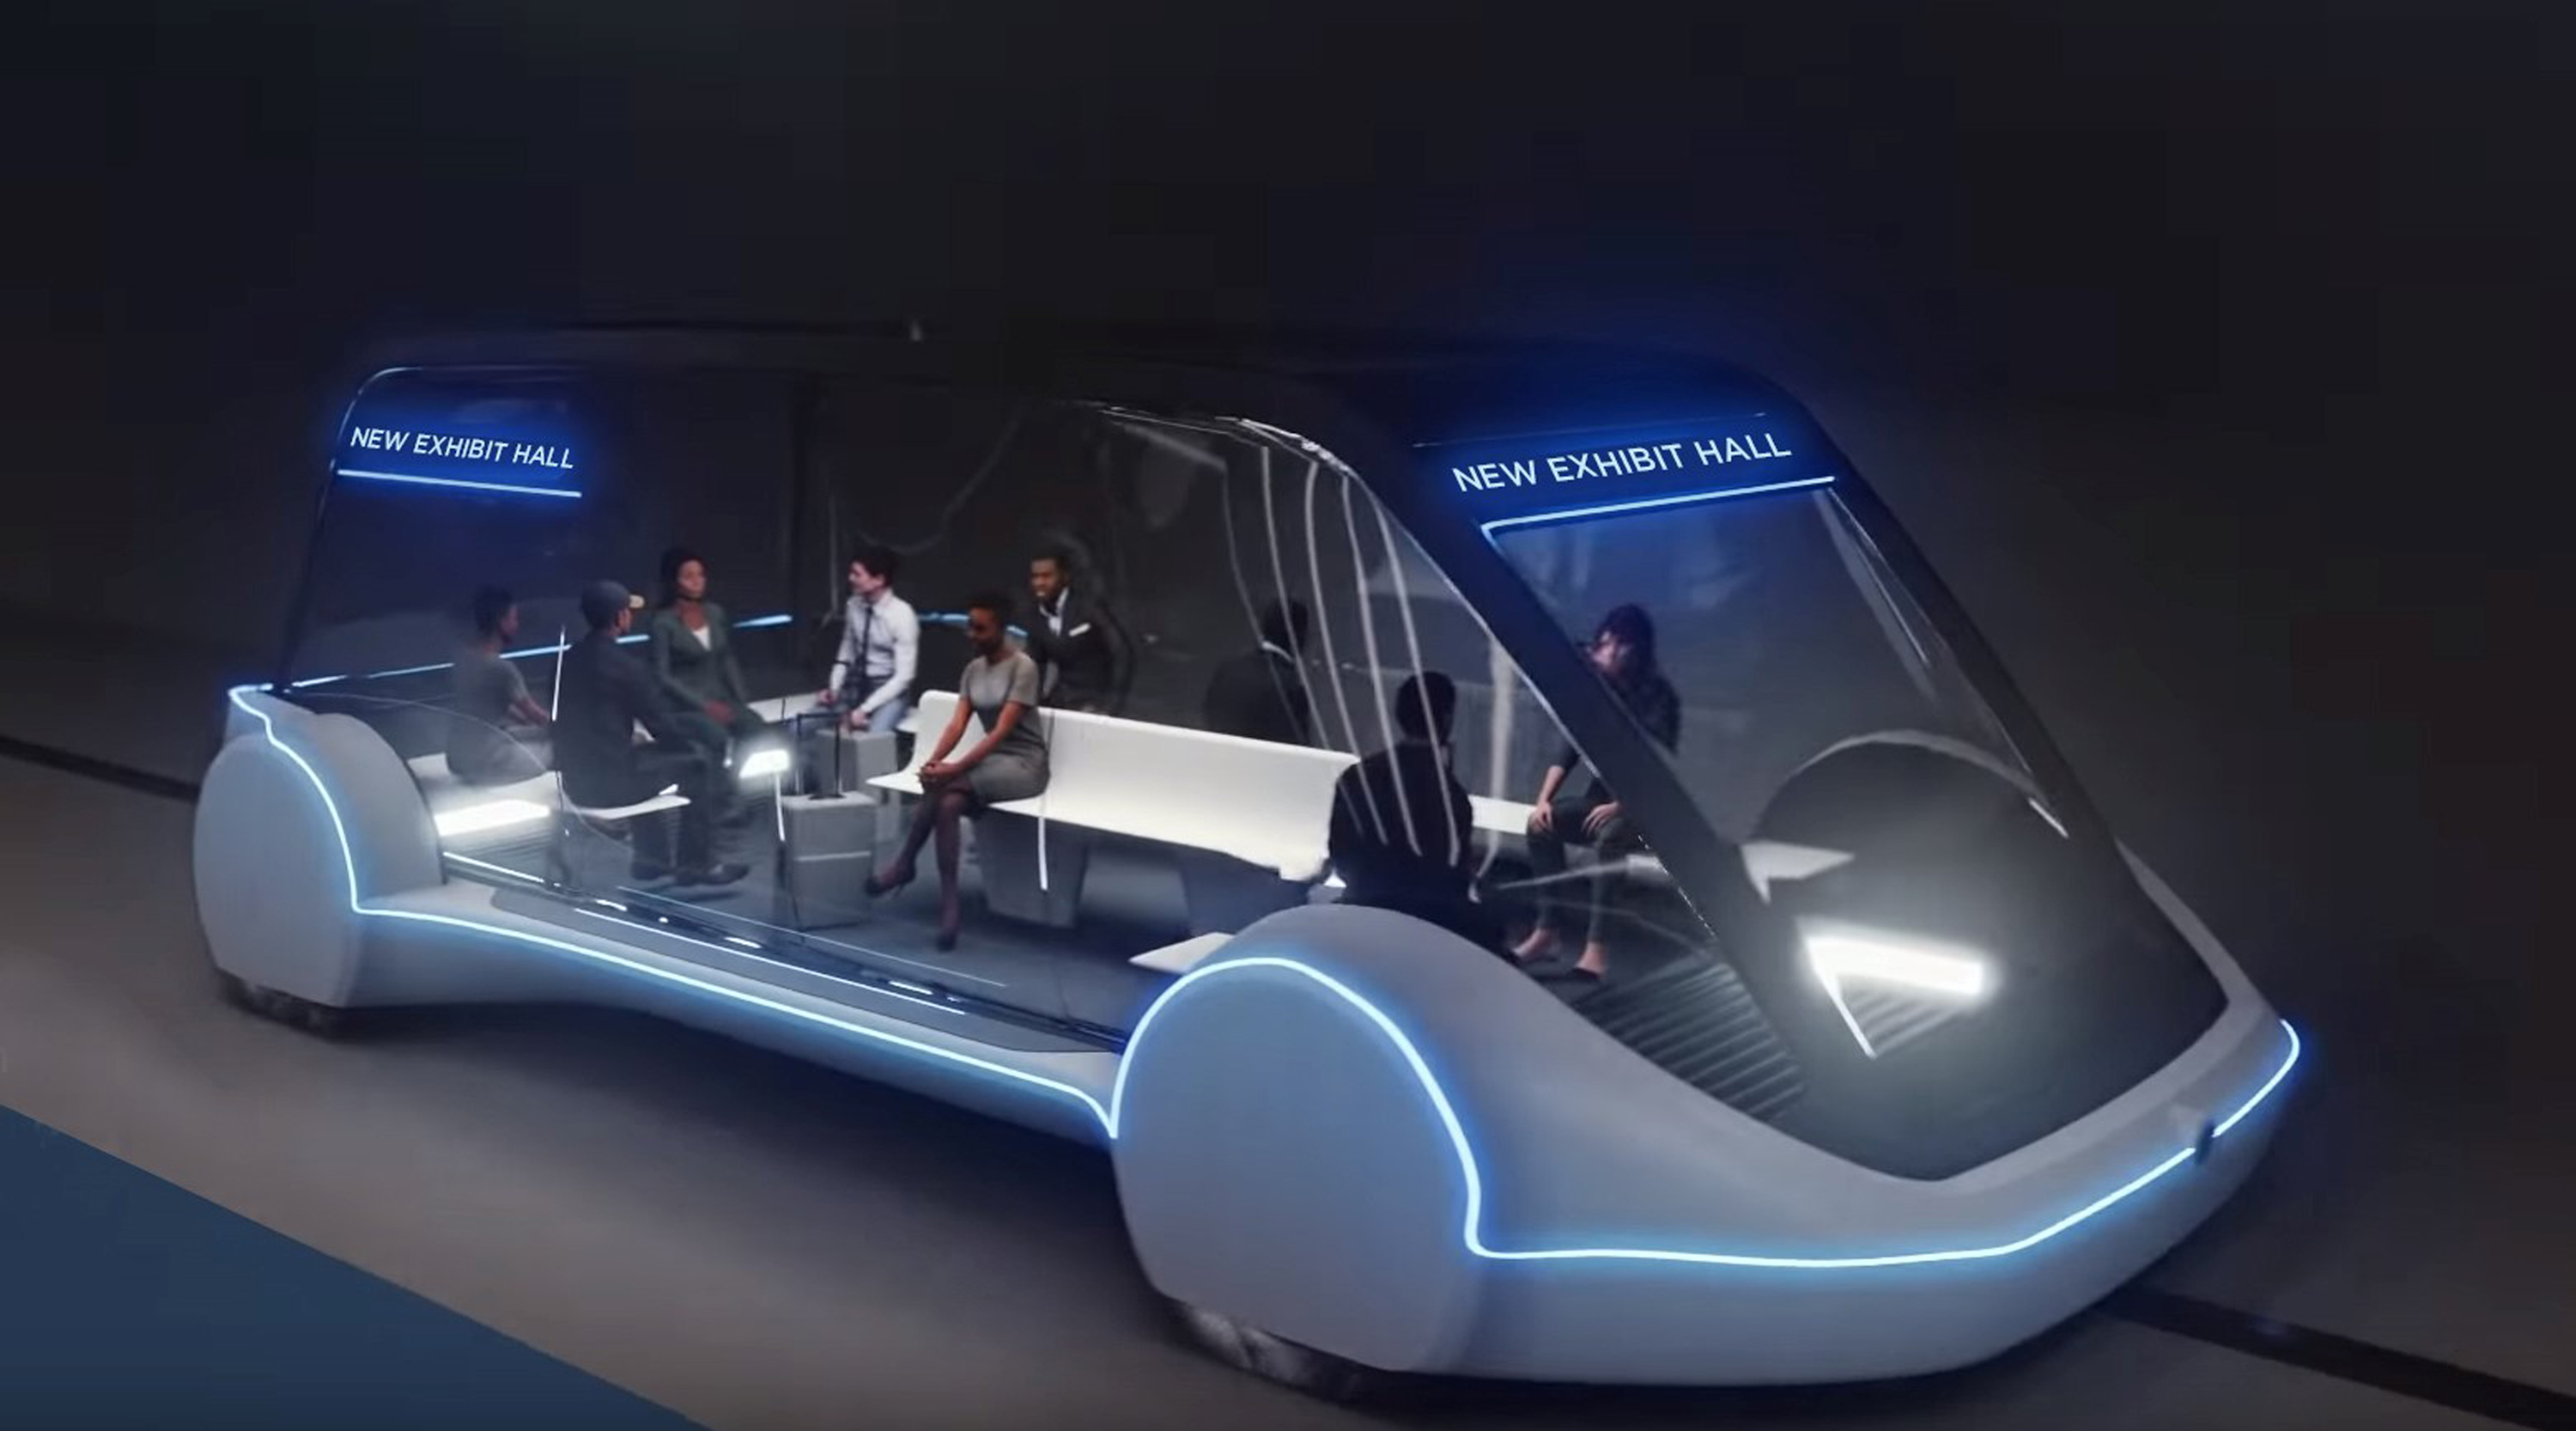 Elon Musk firm pitched to build transit system in Las Vegas